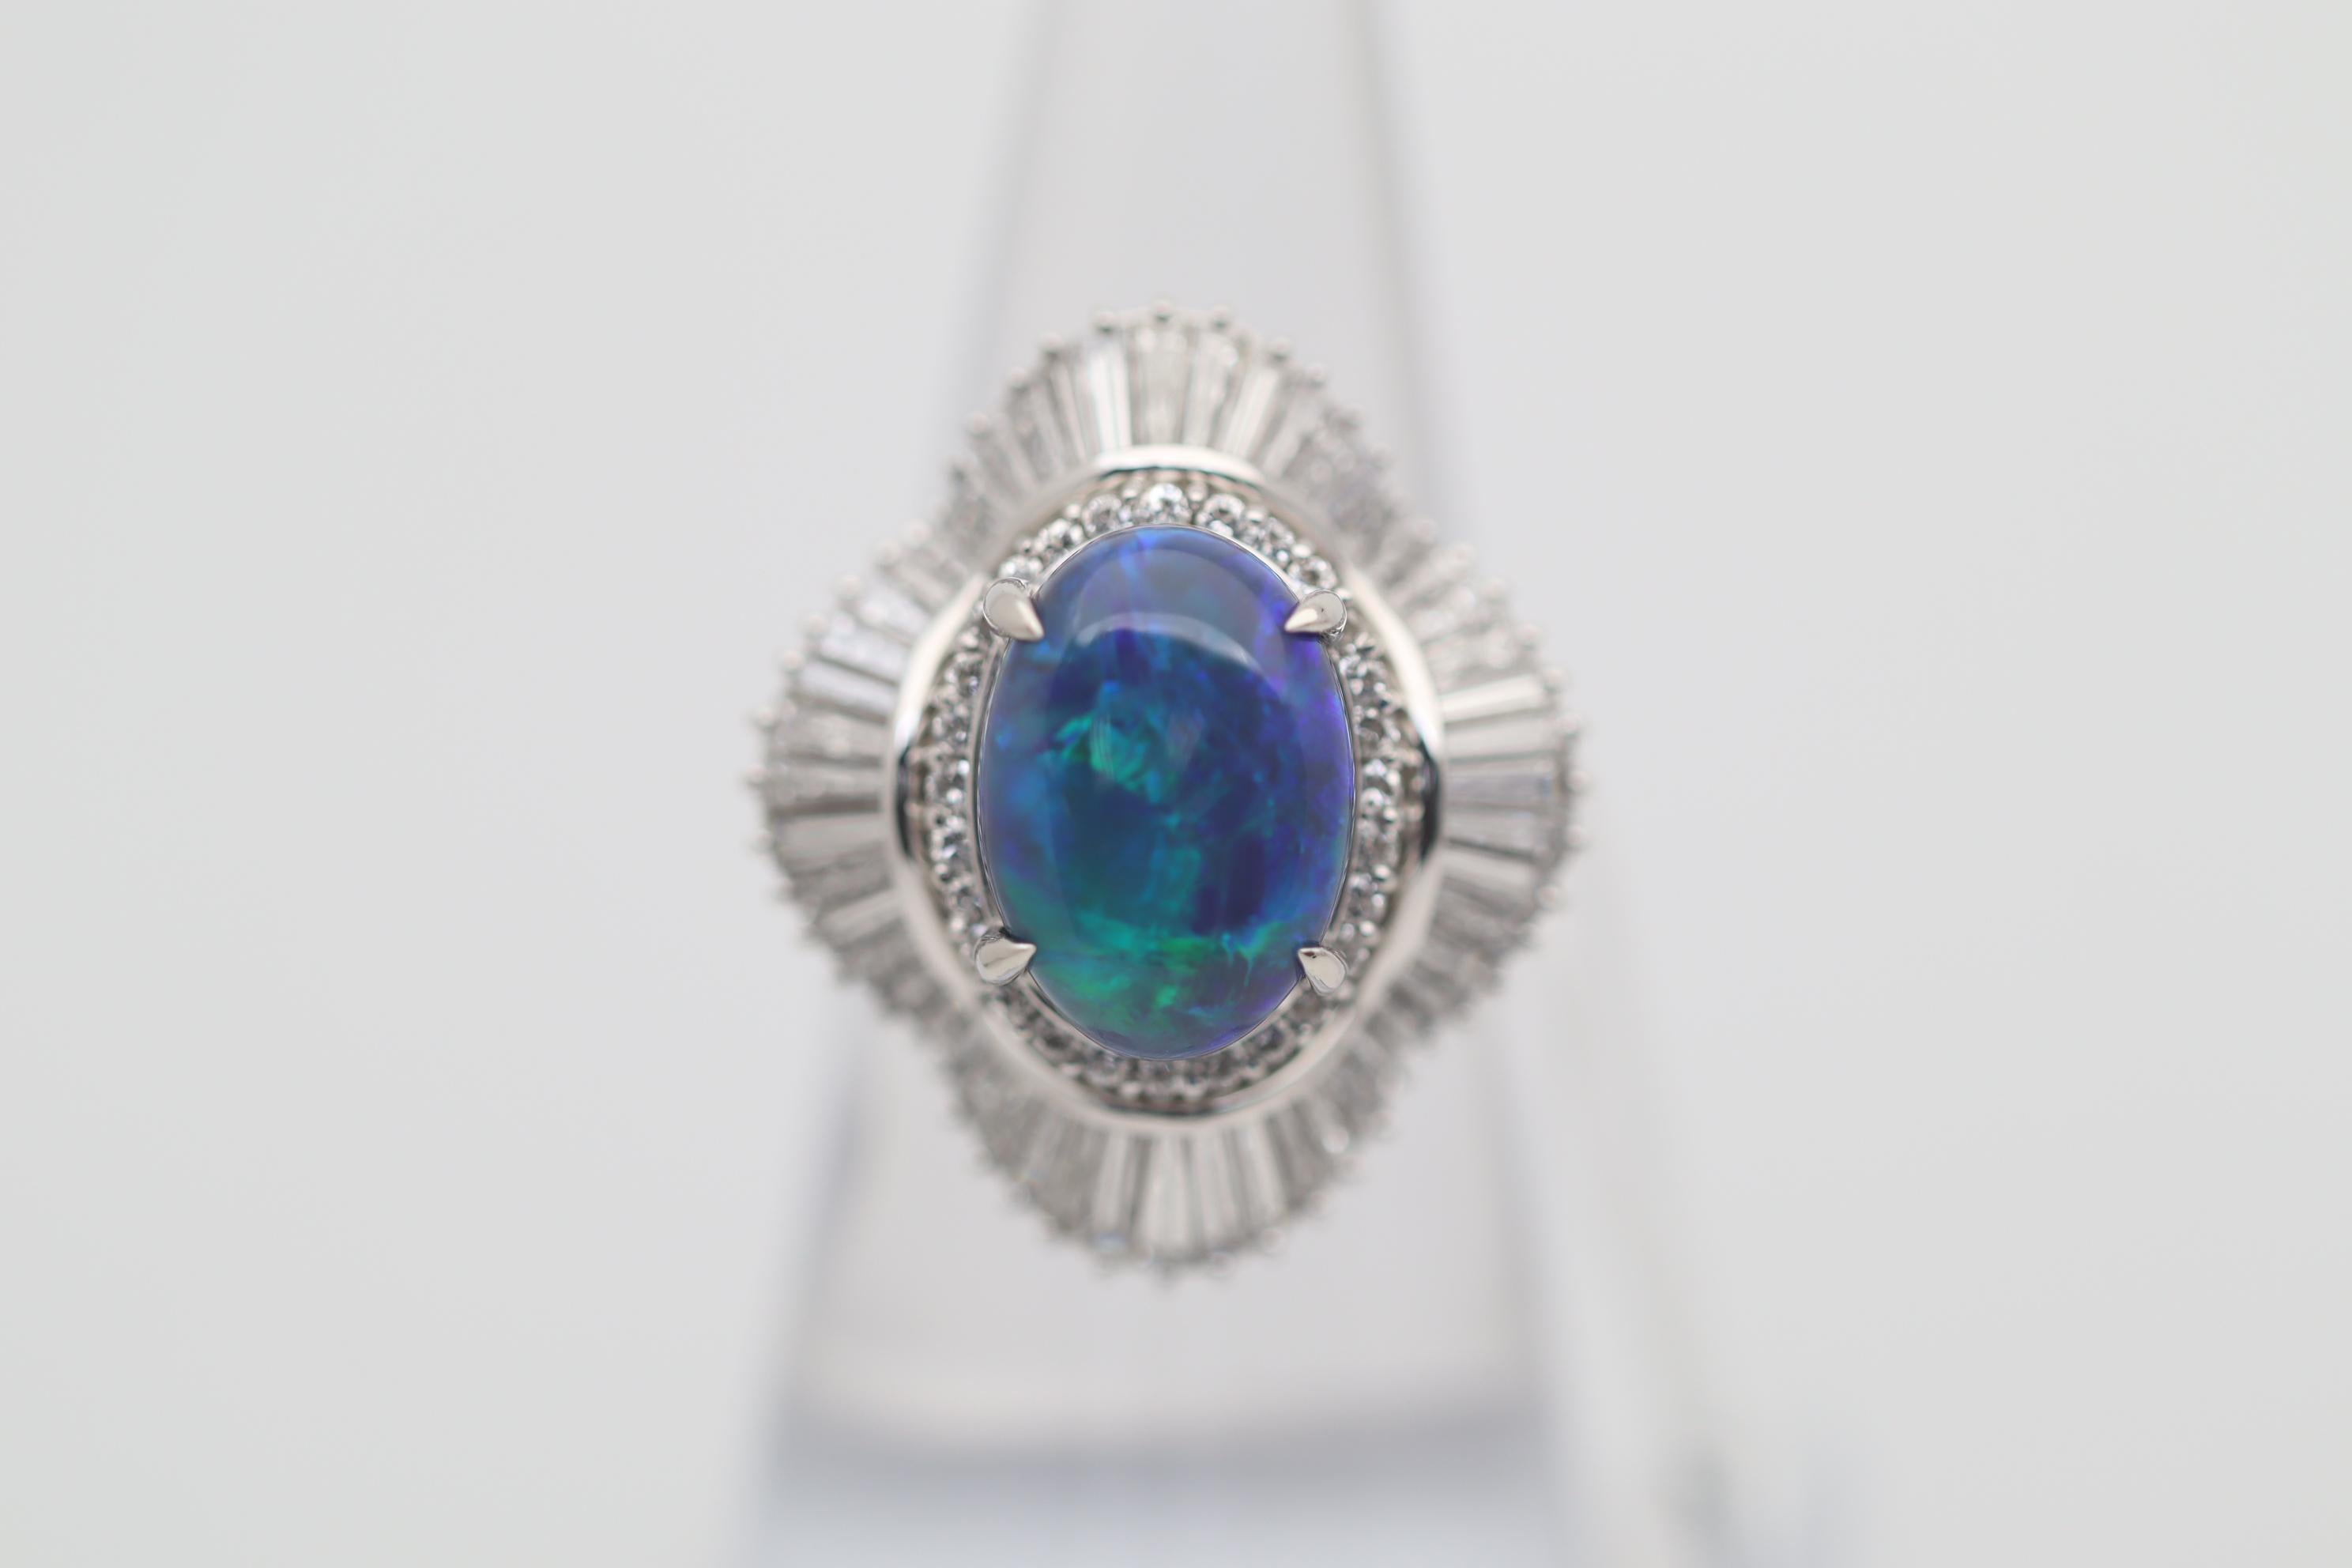 A large and impressive platinum cocktail ring featuring a natural Australian black opal! The opal weighs 4.60 carats and has great play of color as flashes of greens and blues dance across the stone. It is complemented by spiraling baguette and